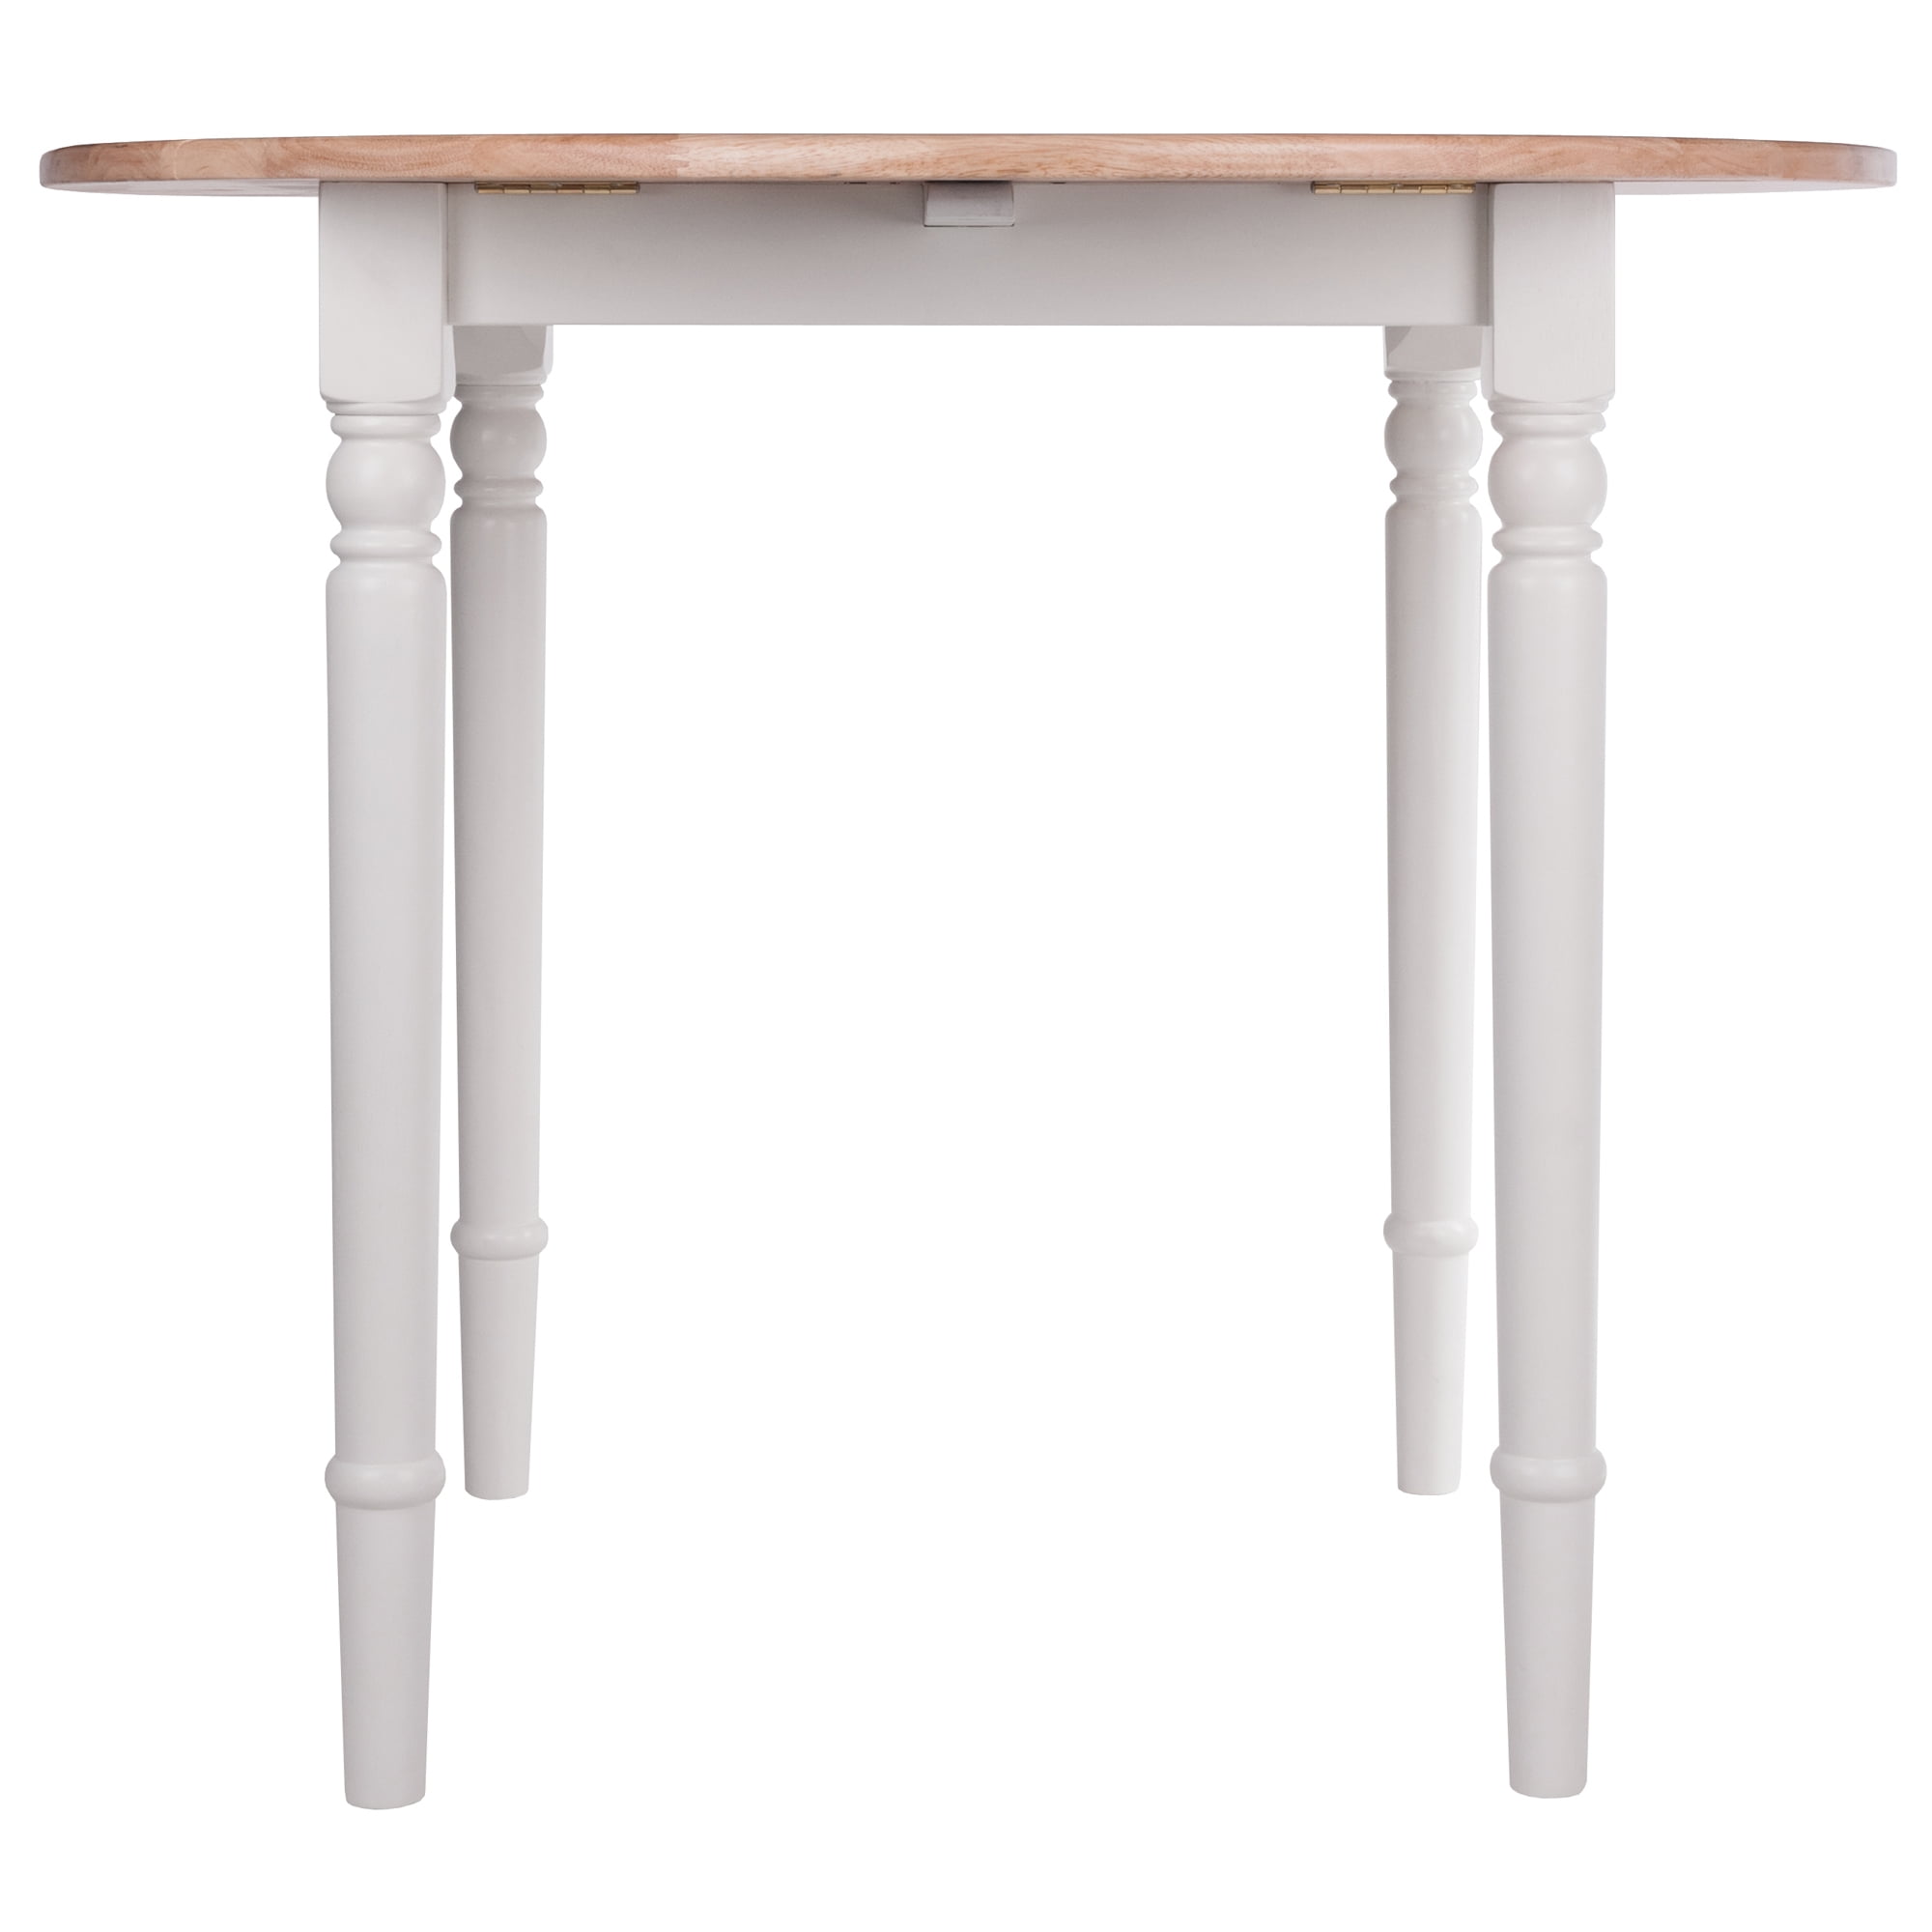 Winsome Wood Sorella Round Drop Leaf Dining Table, Natural & White Finish